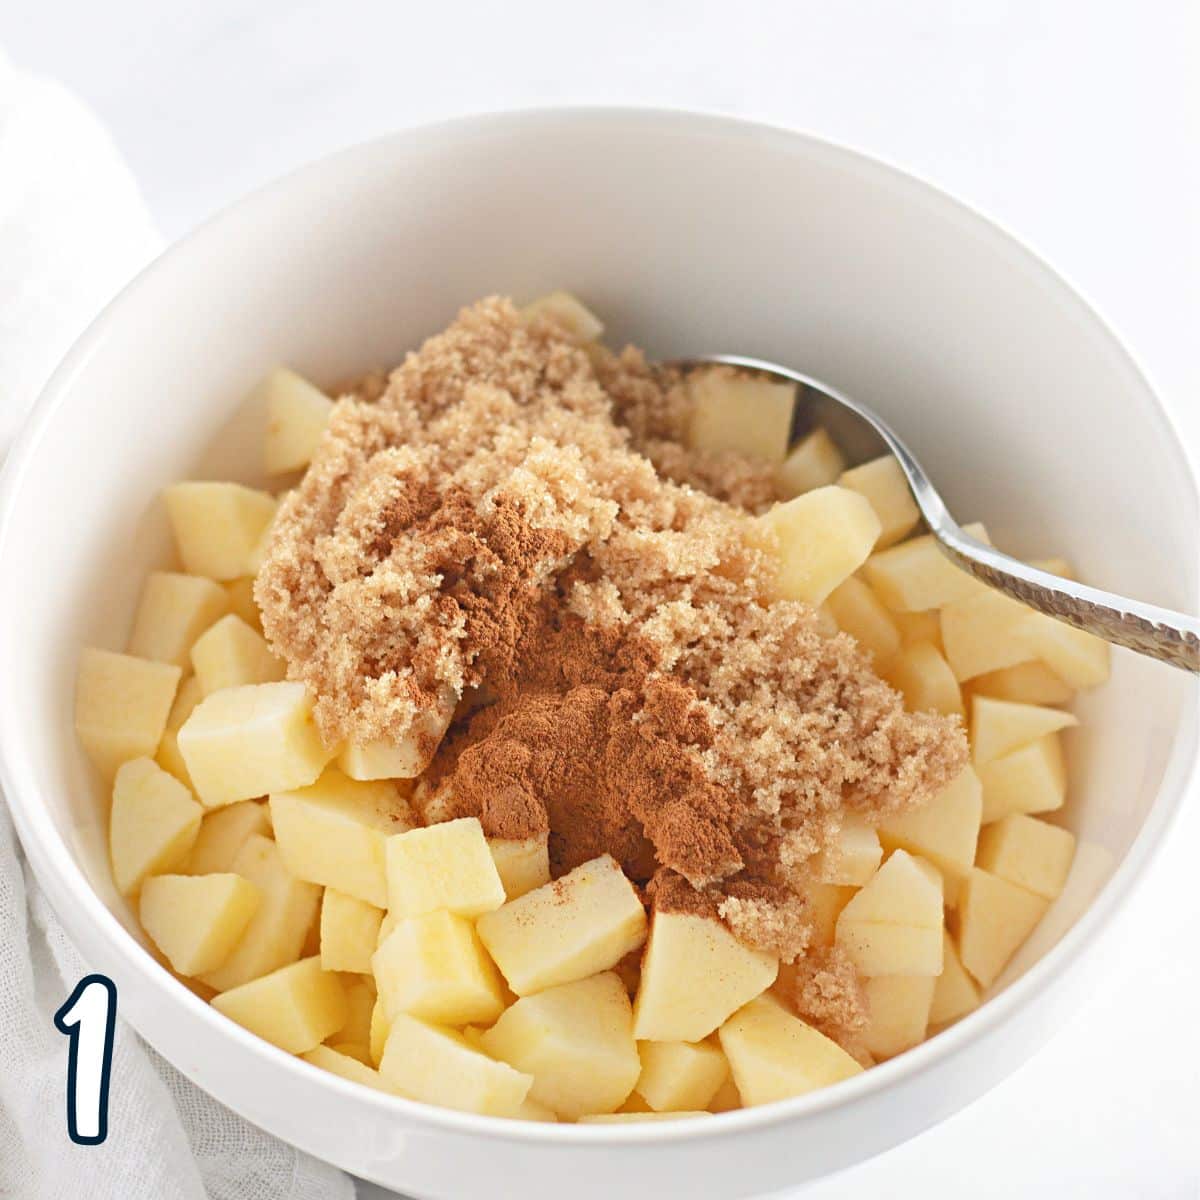 A bowl containing diced apple pieces sprinkled with brown sugar and cinnamon, with a spoon.